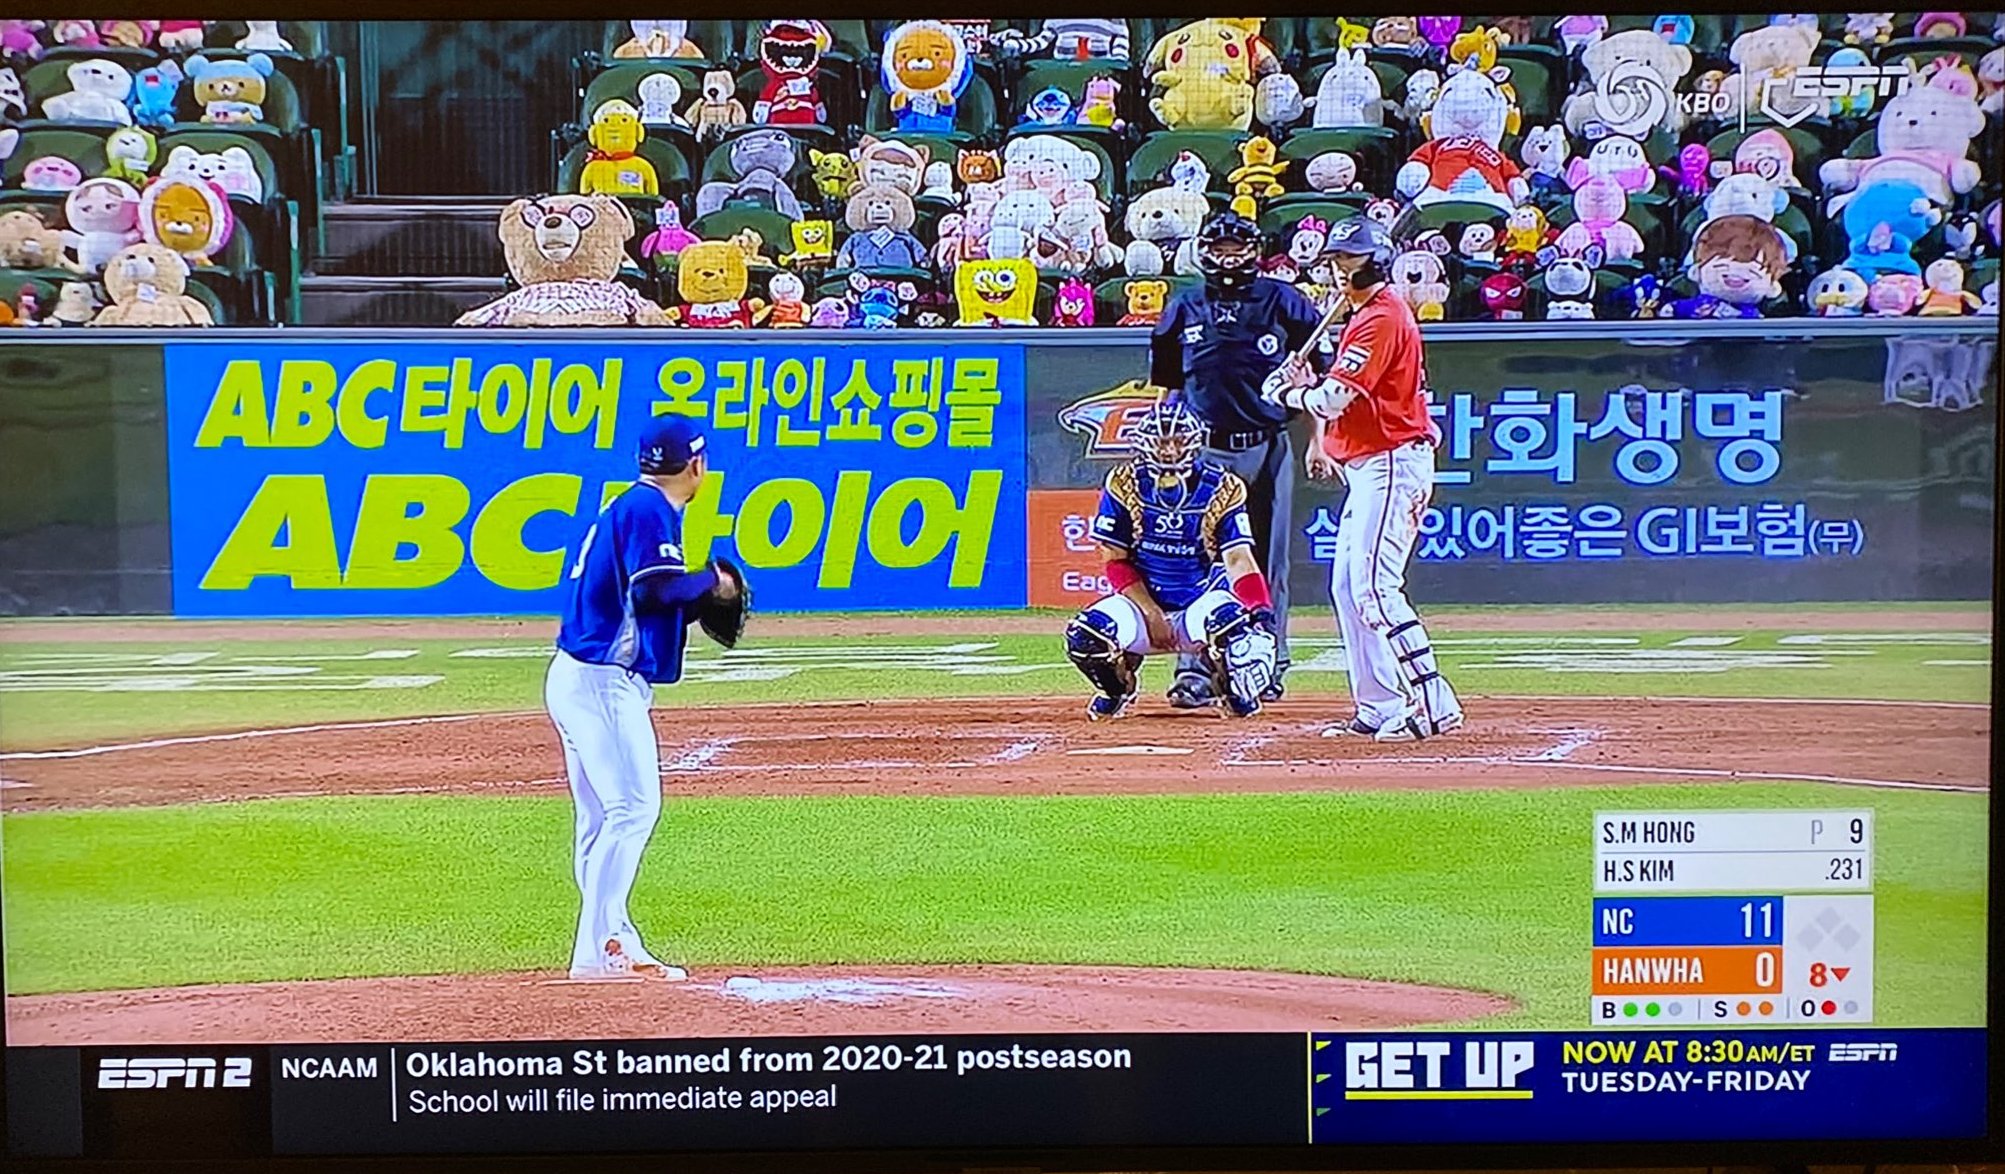 voldsom Apparatet Potentiel cartoonbrew.com - Animation News on Twitter: "Due to coronavirus, only  cartoon characters are allowed to attend Korean baseball games. Who do you  recognize in the stands? https://t.co/9VOQmie7FK" / Twitter